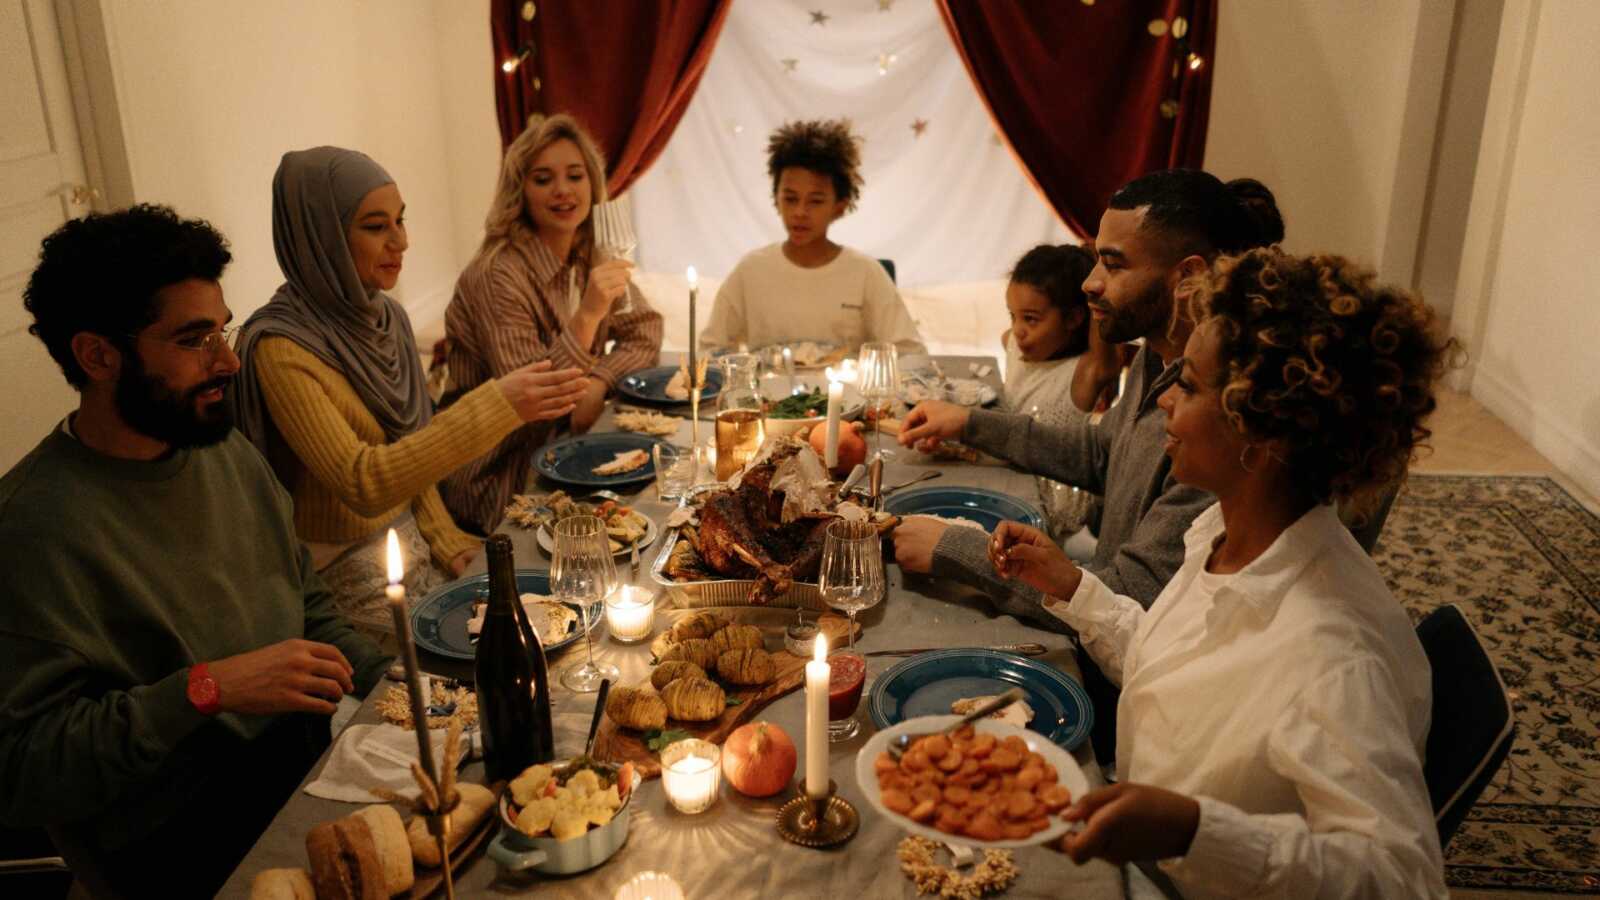 a group of people of different races sit together at a table for a holiday dinner